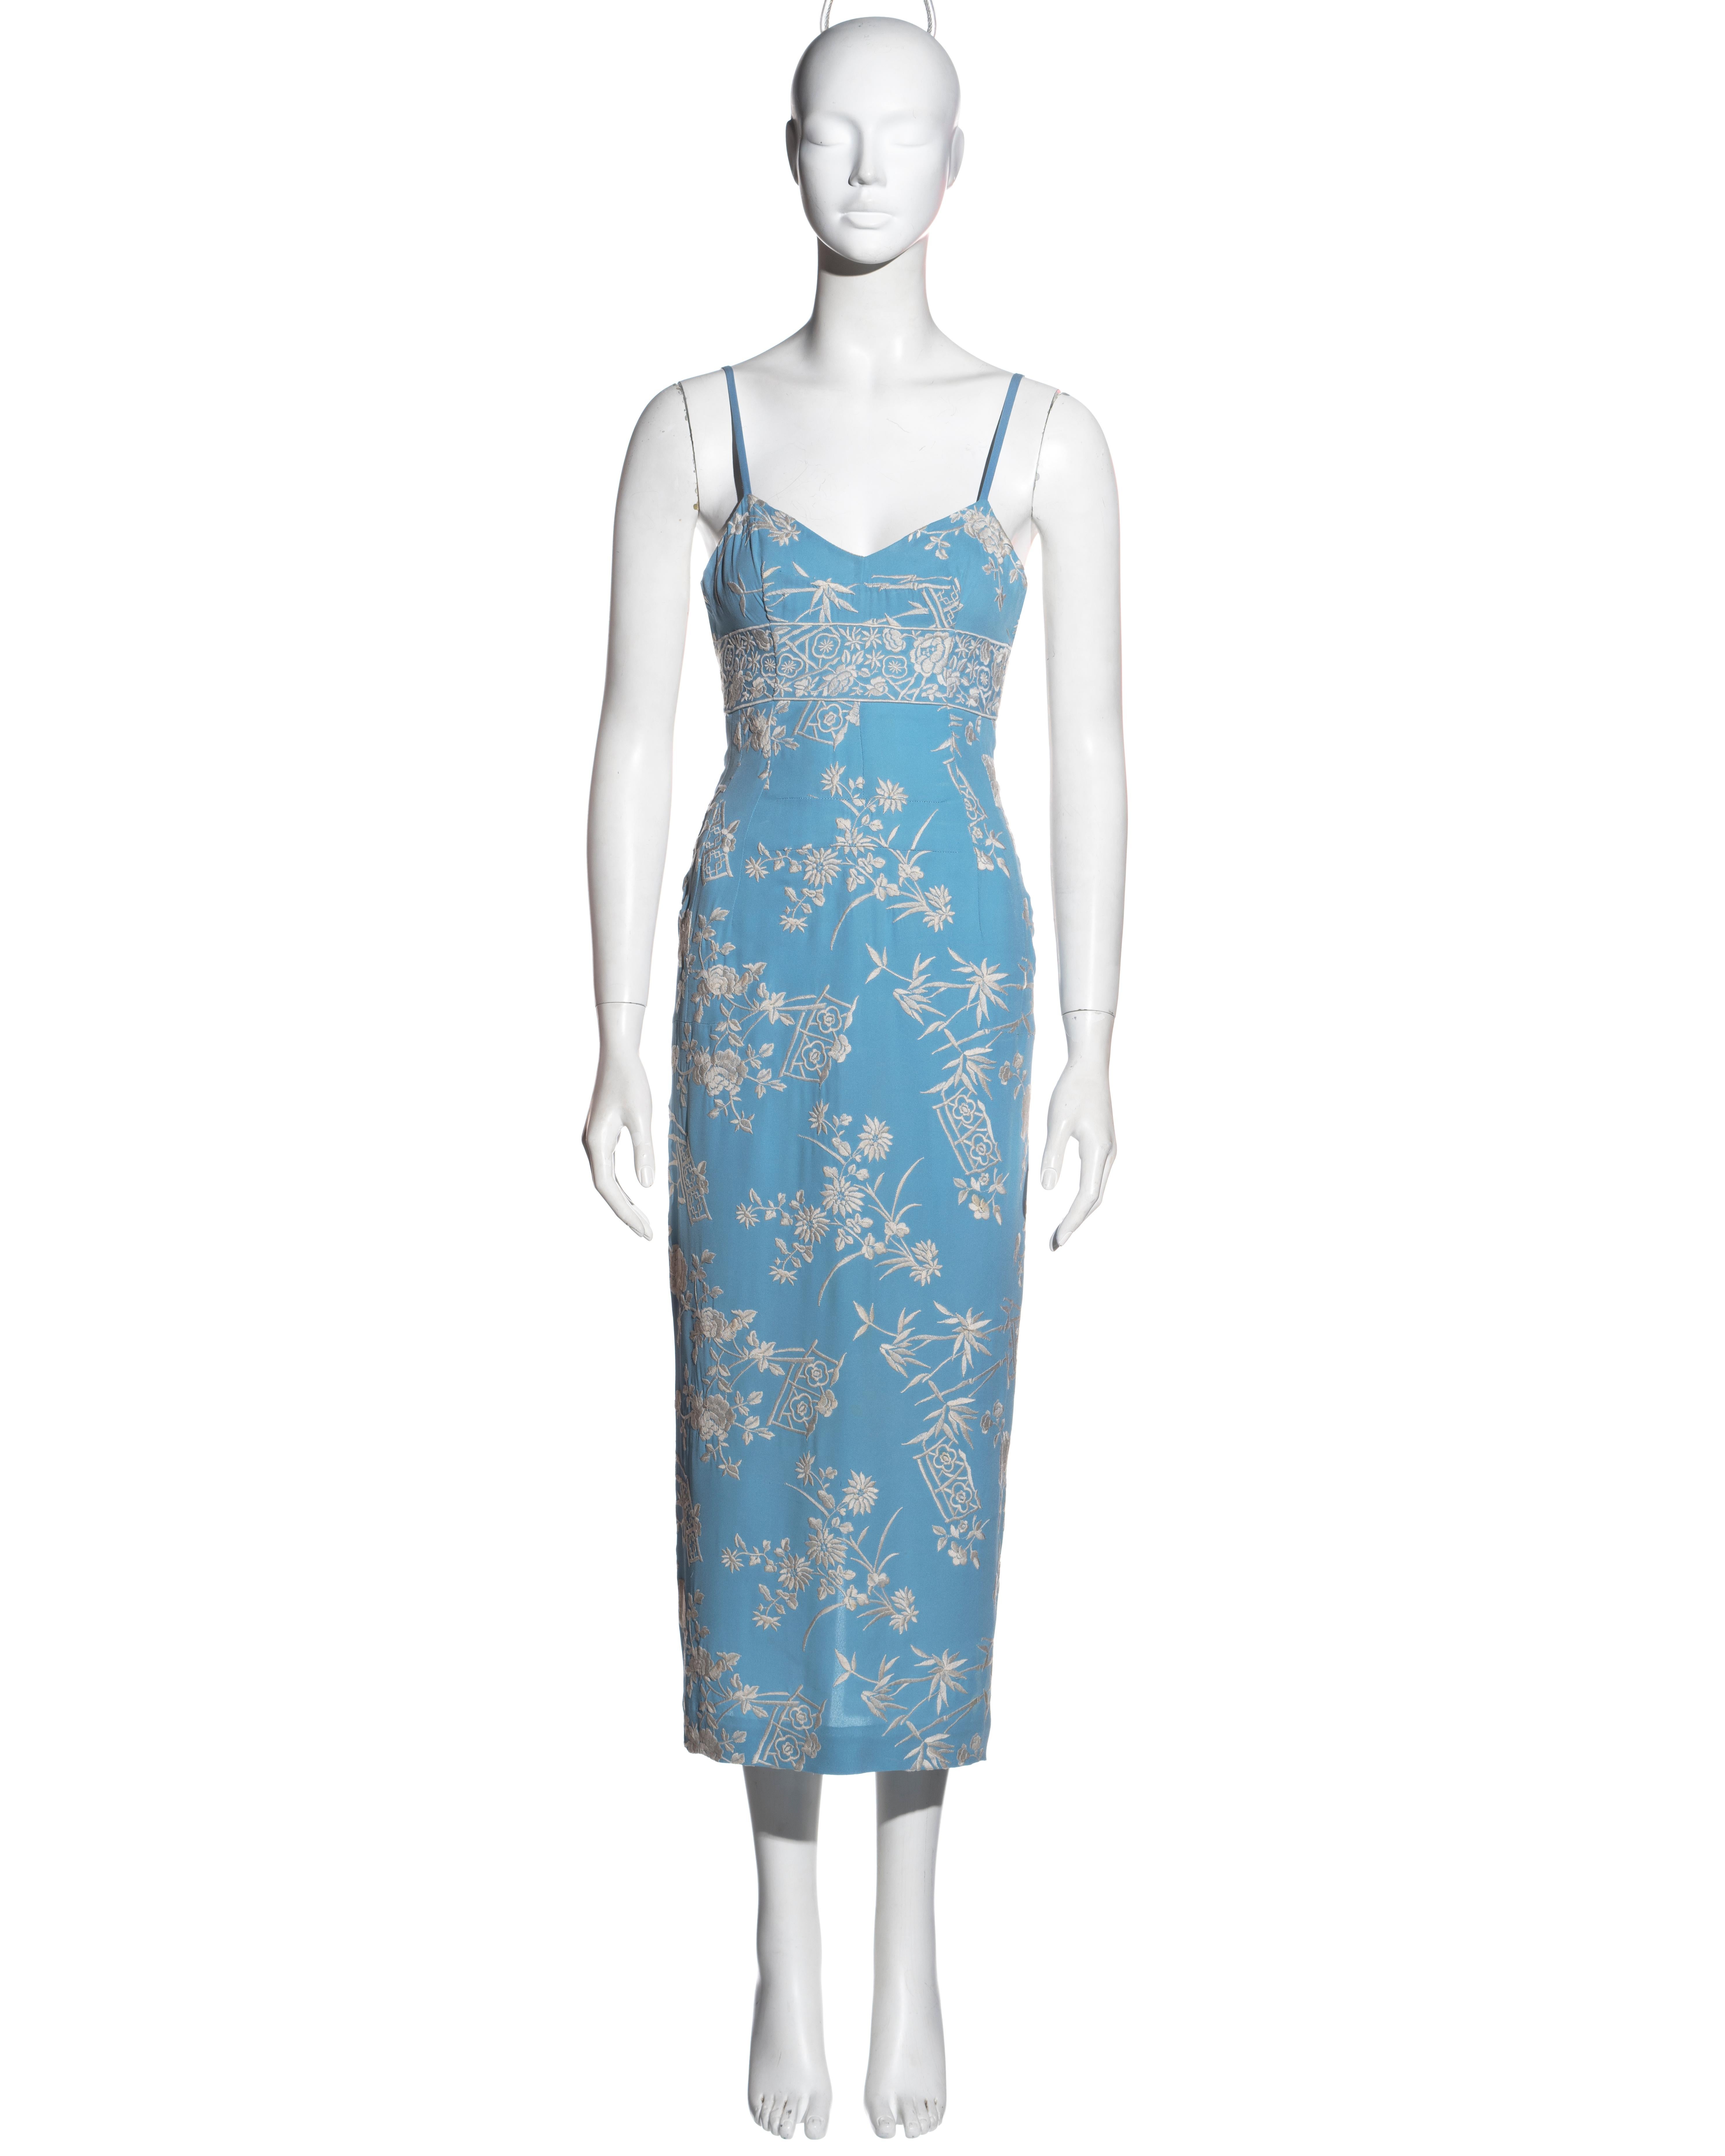 ▪ Dolce & Gabbana blue silk embroidered evening dress
▪ Wedgwood blue silk with white Chinese inspired embroidery 
▪ Spaghetti straps
▪ Back fastening with cotton ribbon and hooks
▪ Open back 
▪ Mid-length skirt 
▪ Size approx. IT 42 - FR 38 - UK